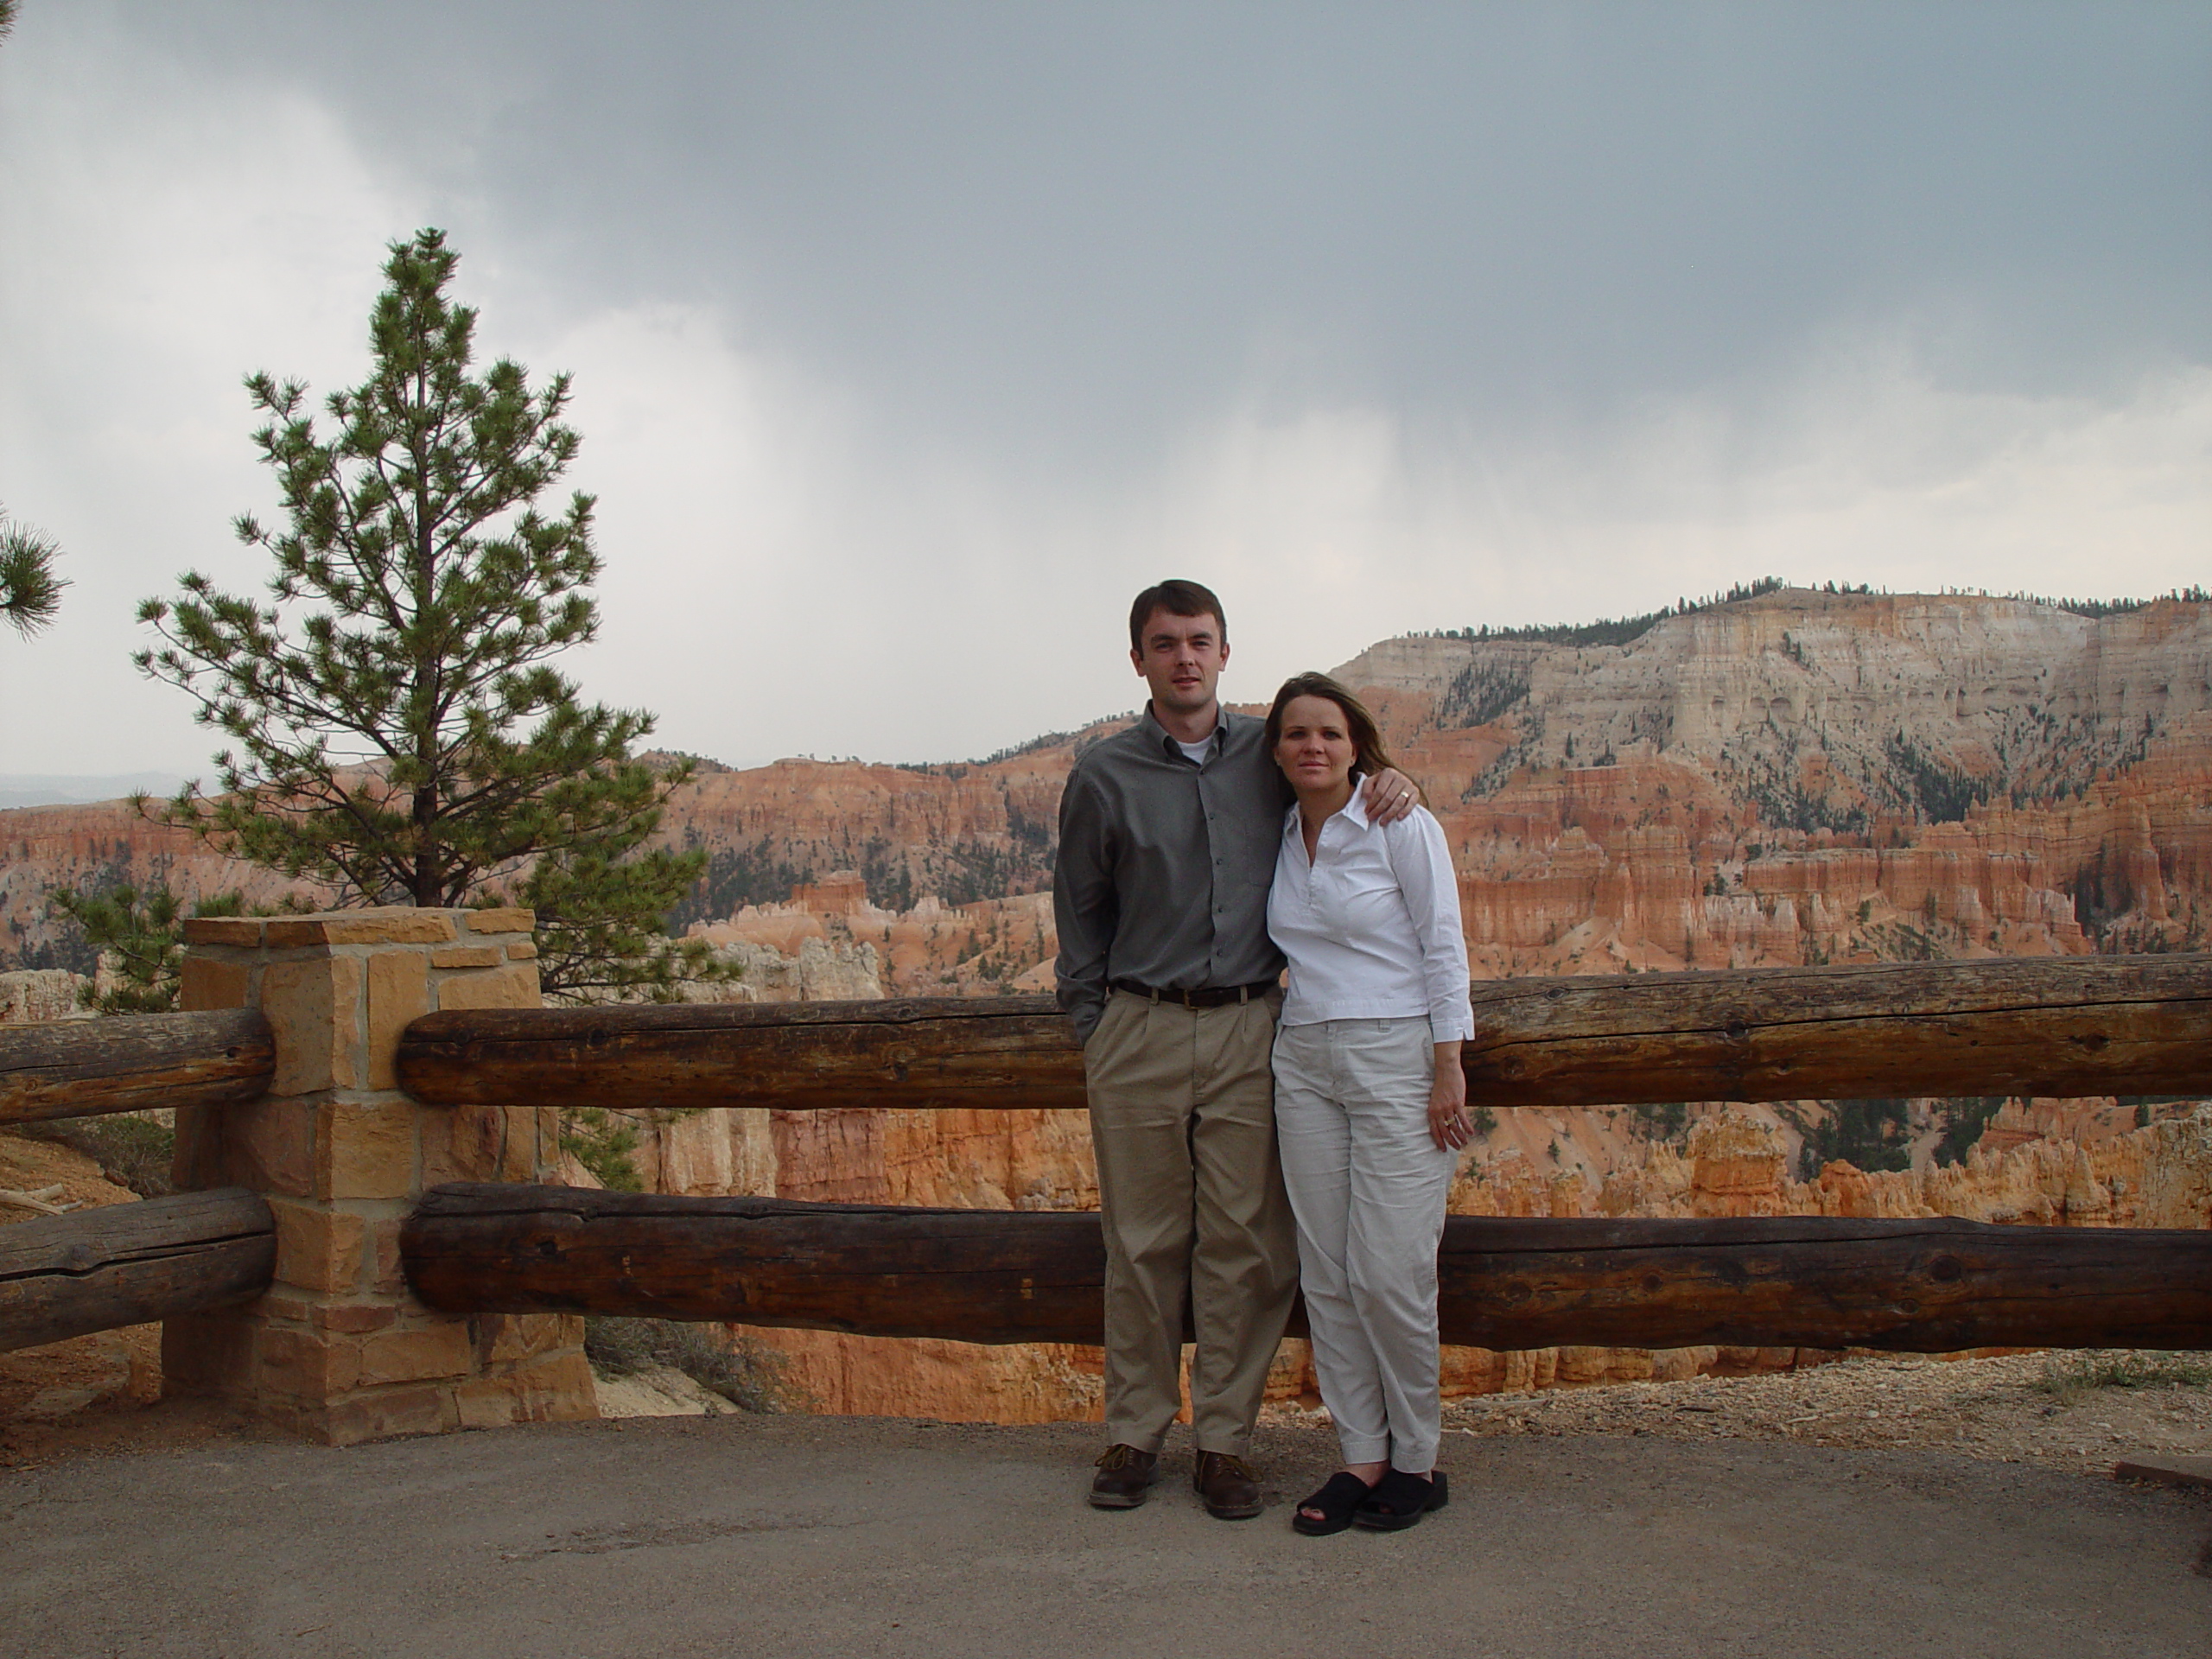 Bryce Canyon, Panguitch, Tacuban, Lee's Ferry